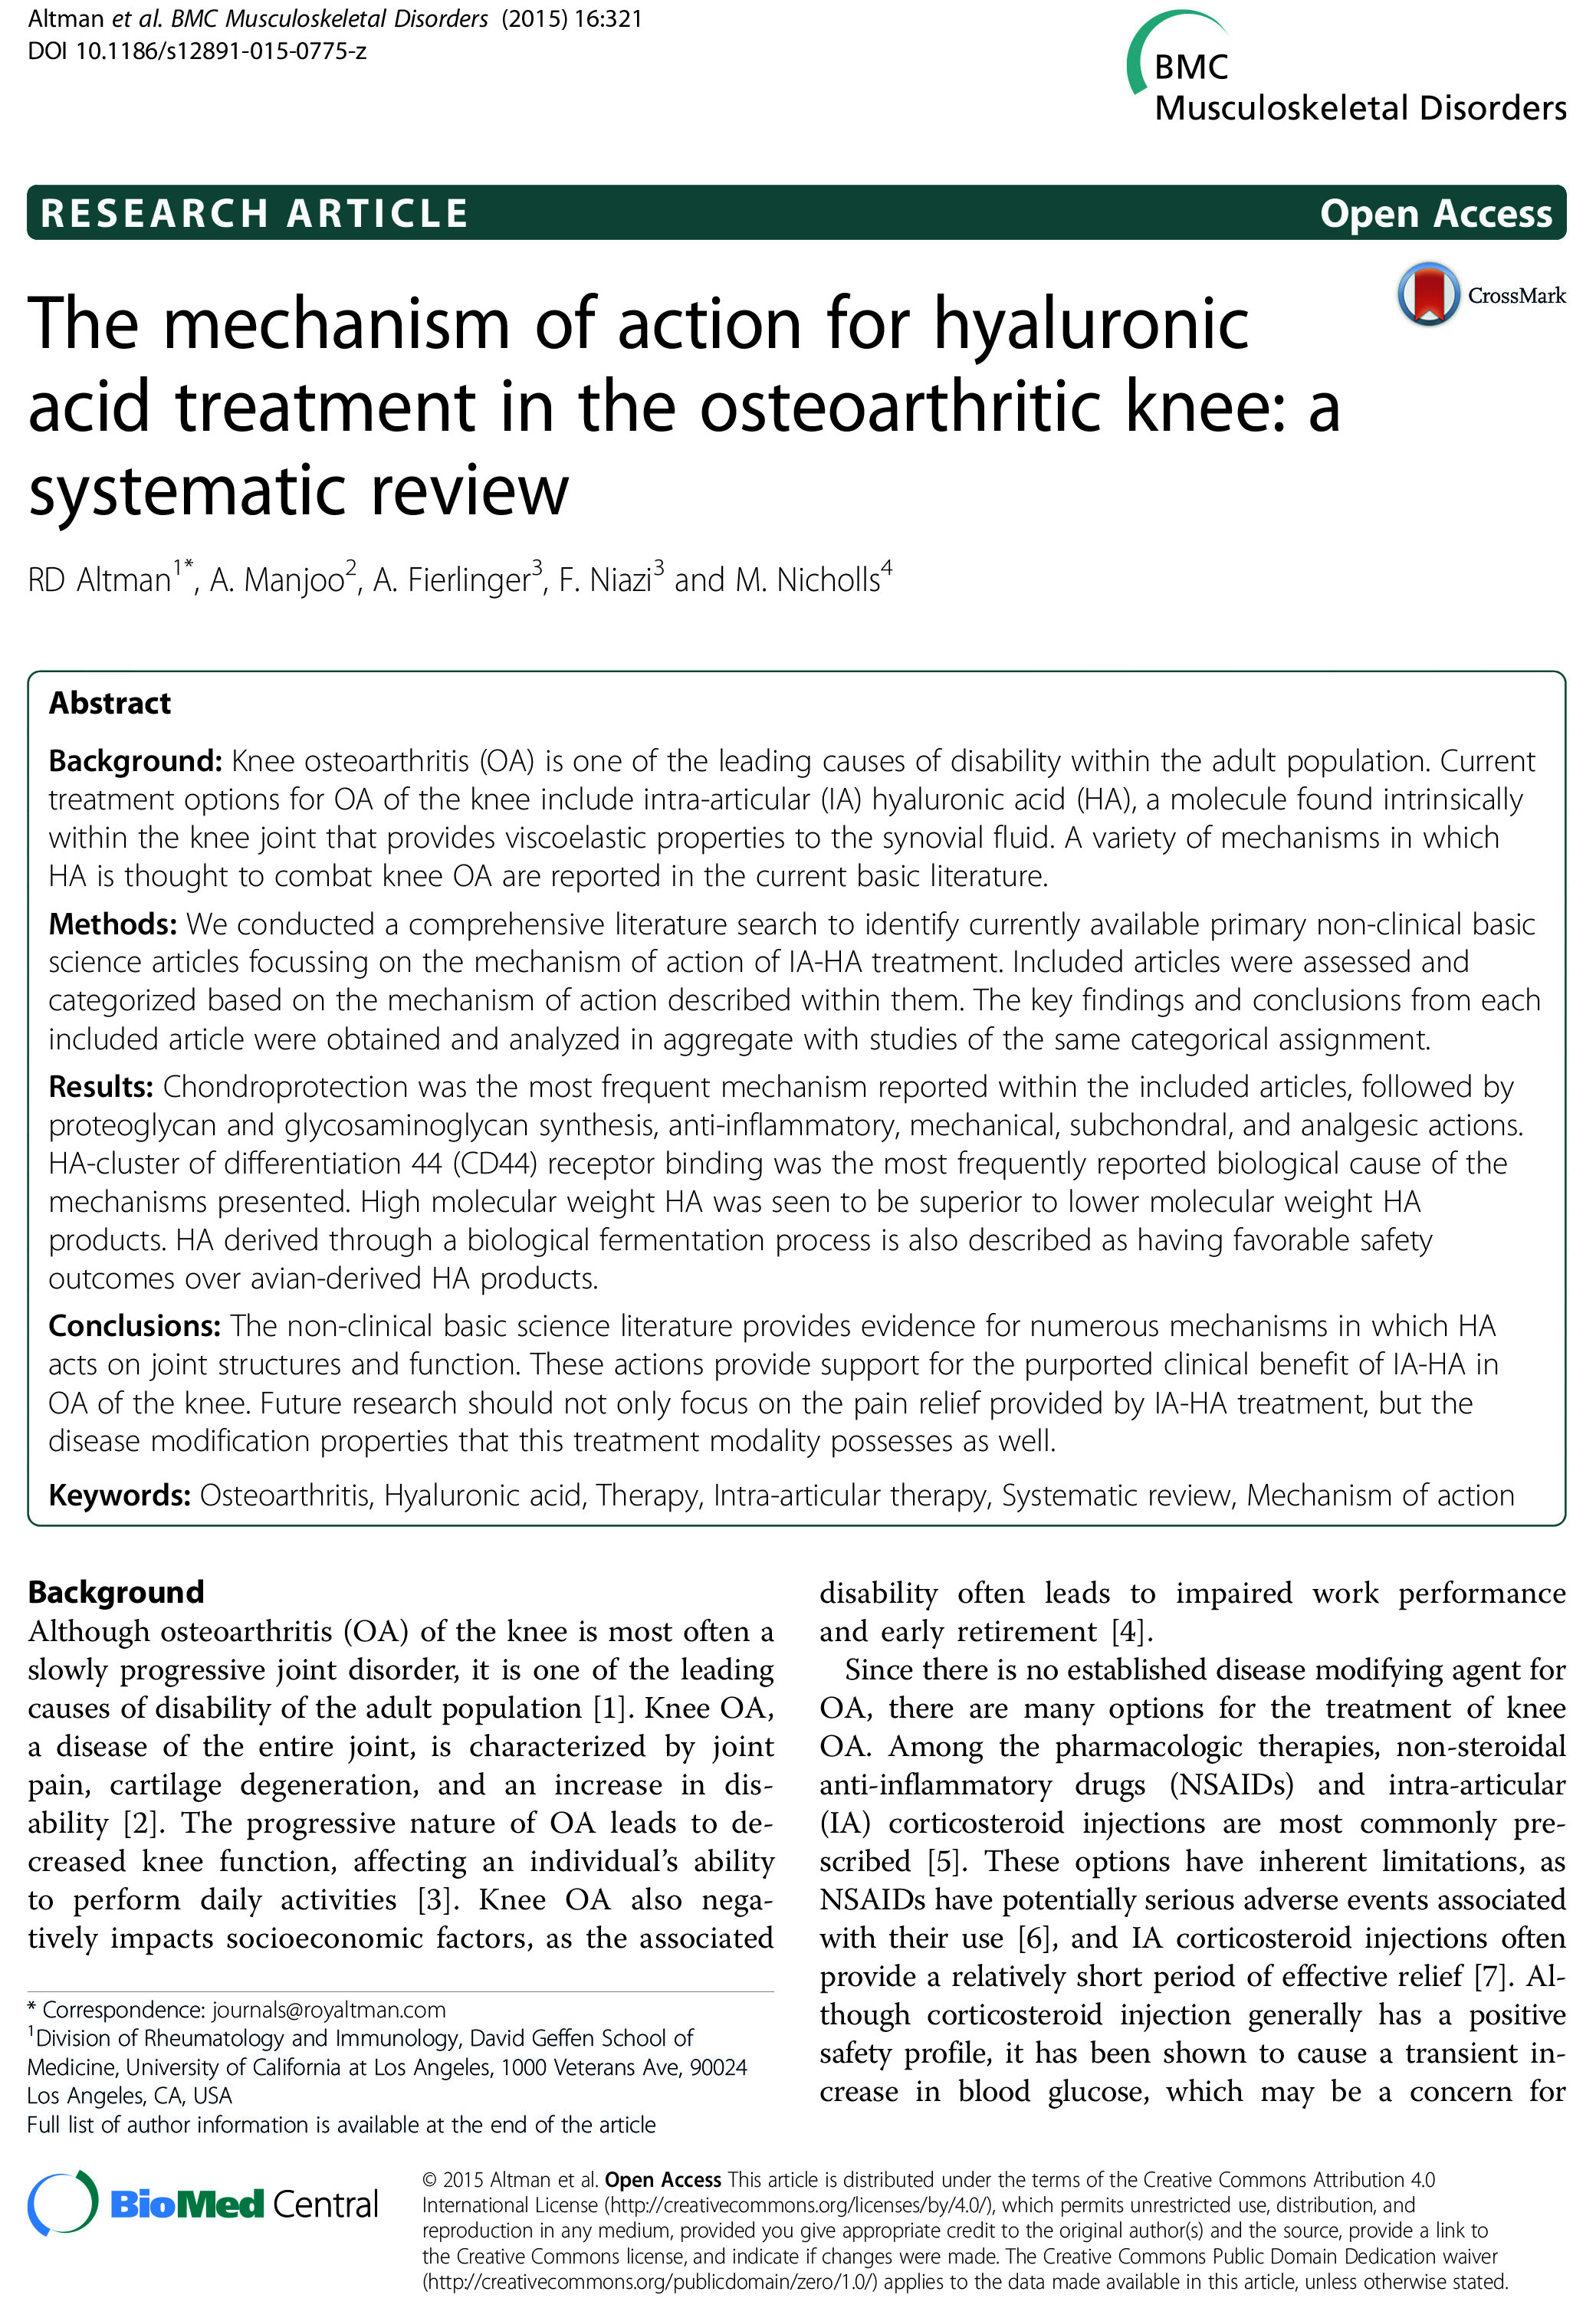 Thmechanism_of_action_for_hyaluronic_acid_treatment_in_the_osteoarthritic_knee_a_systematic_review-1.jpg